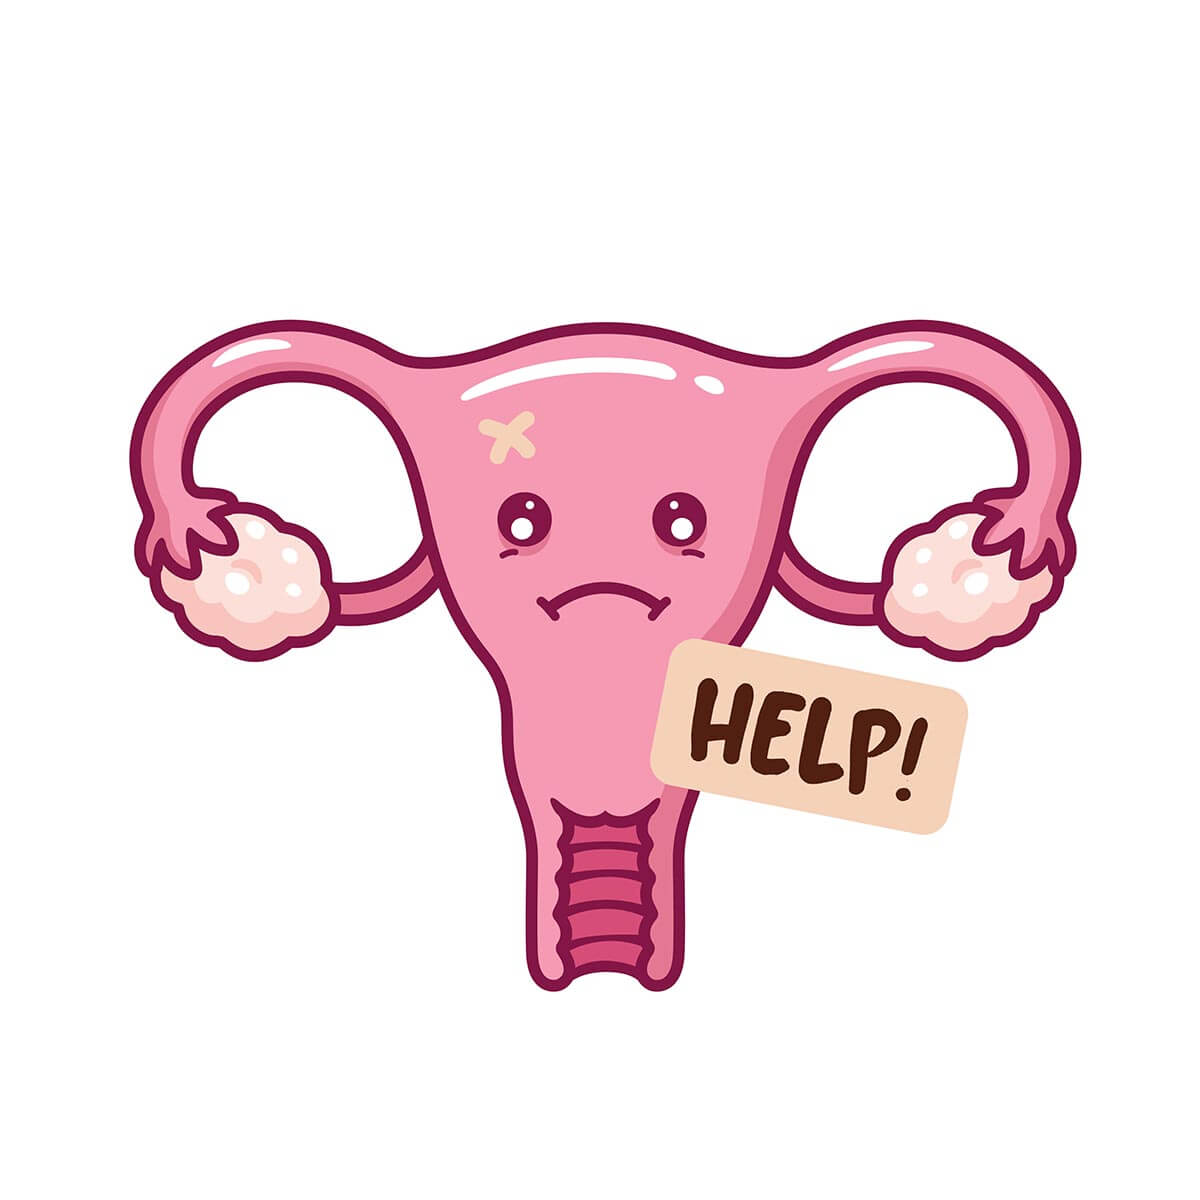 abnormal vaginal bleeding, reproductive health, family planning